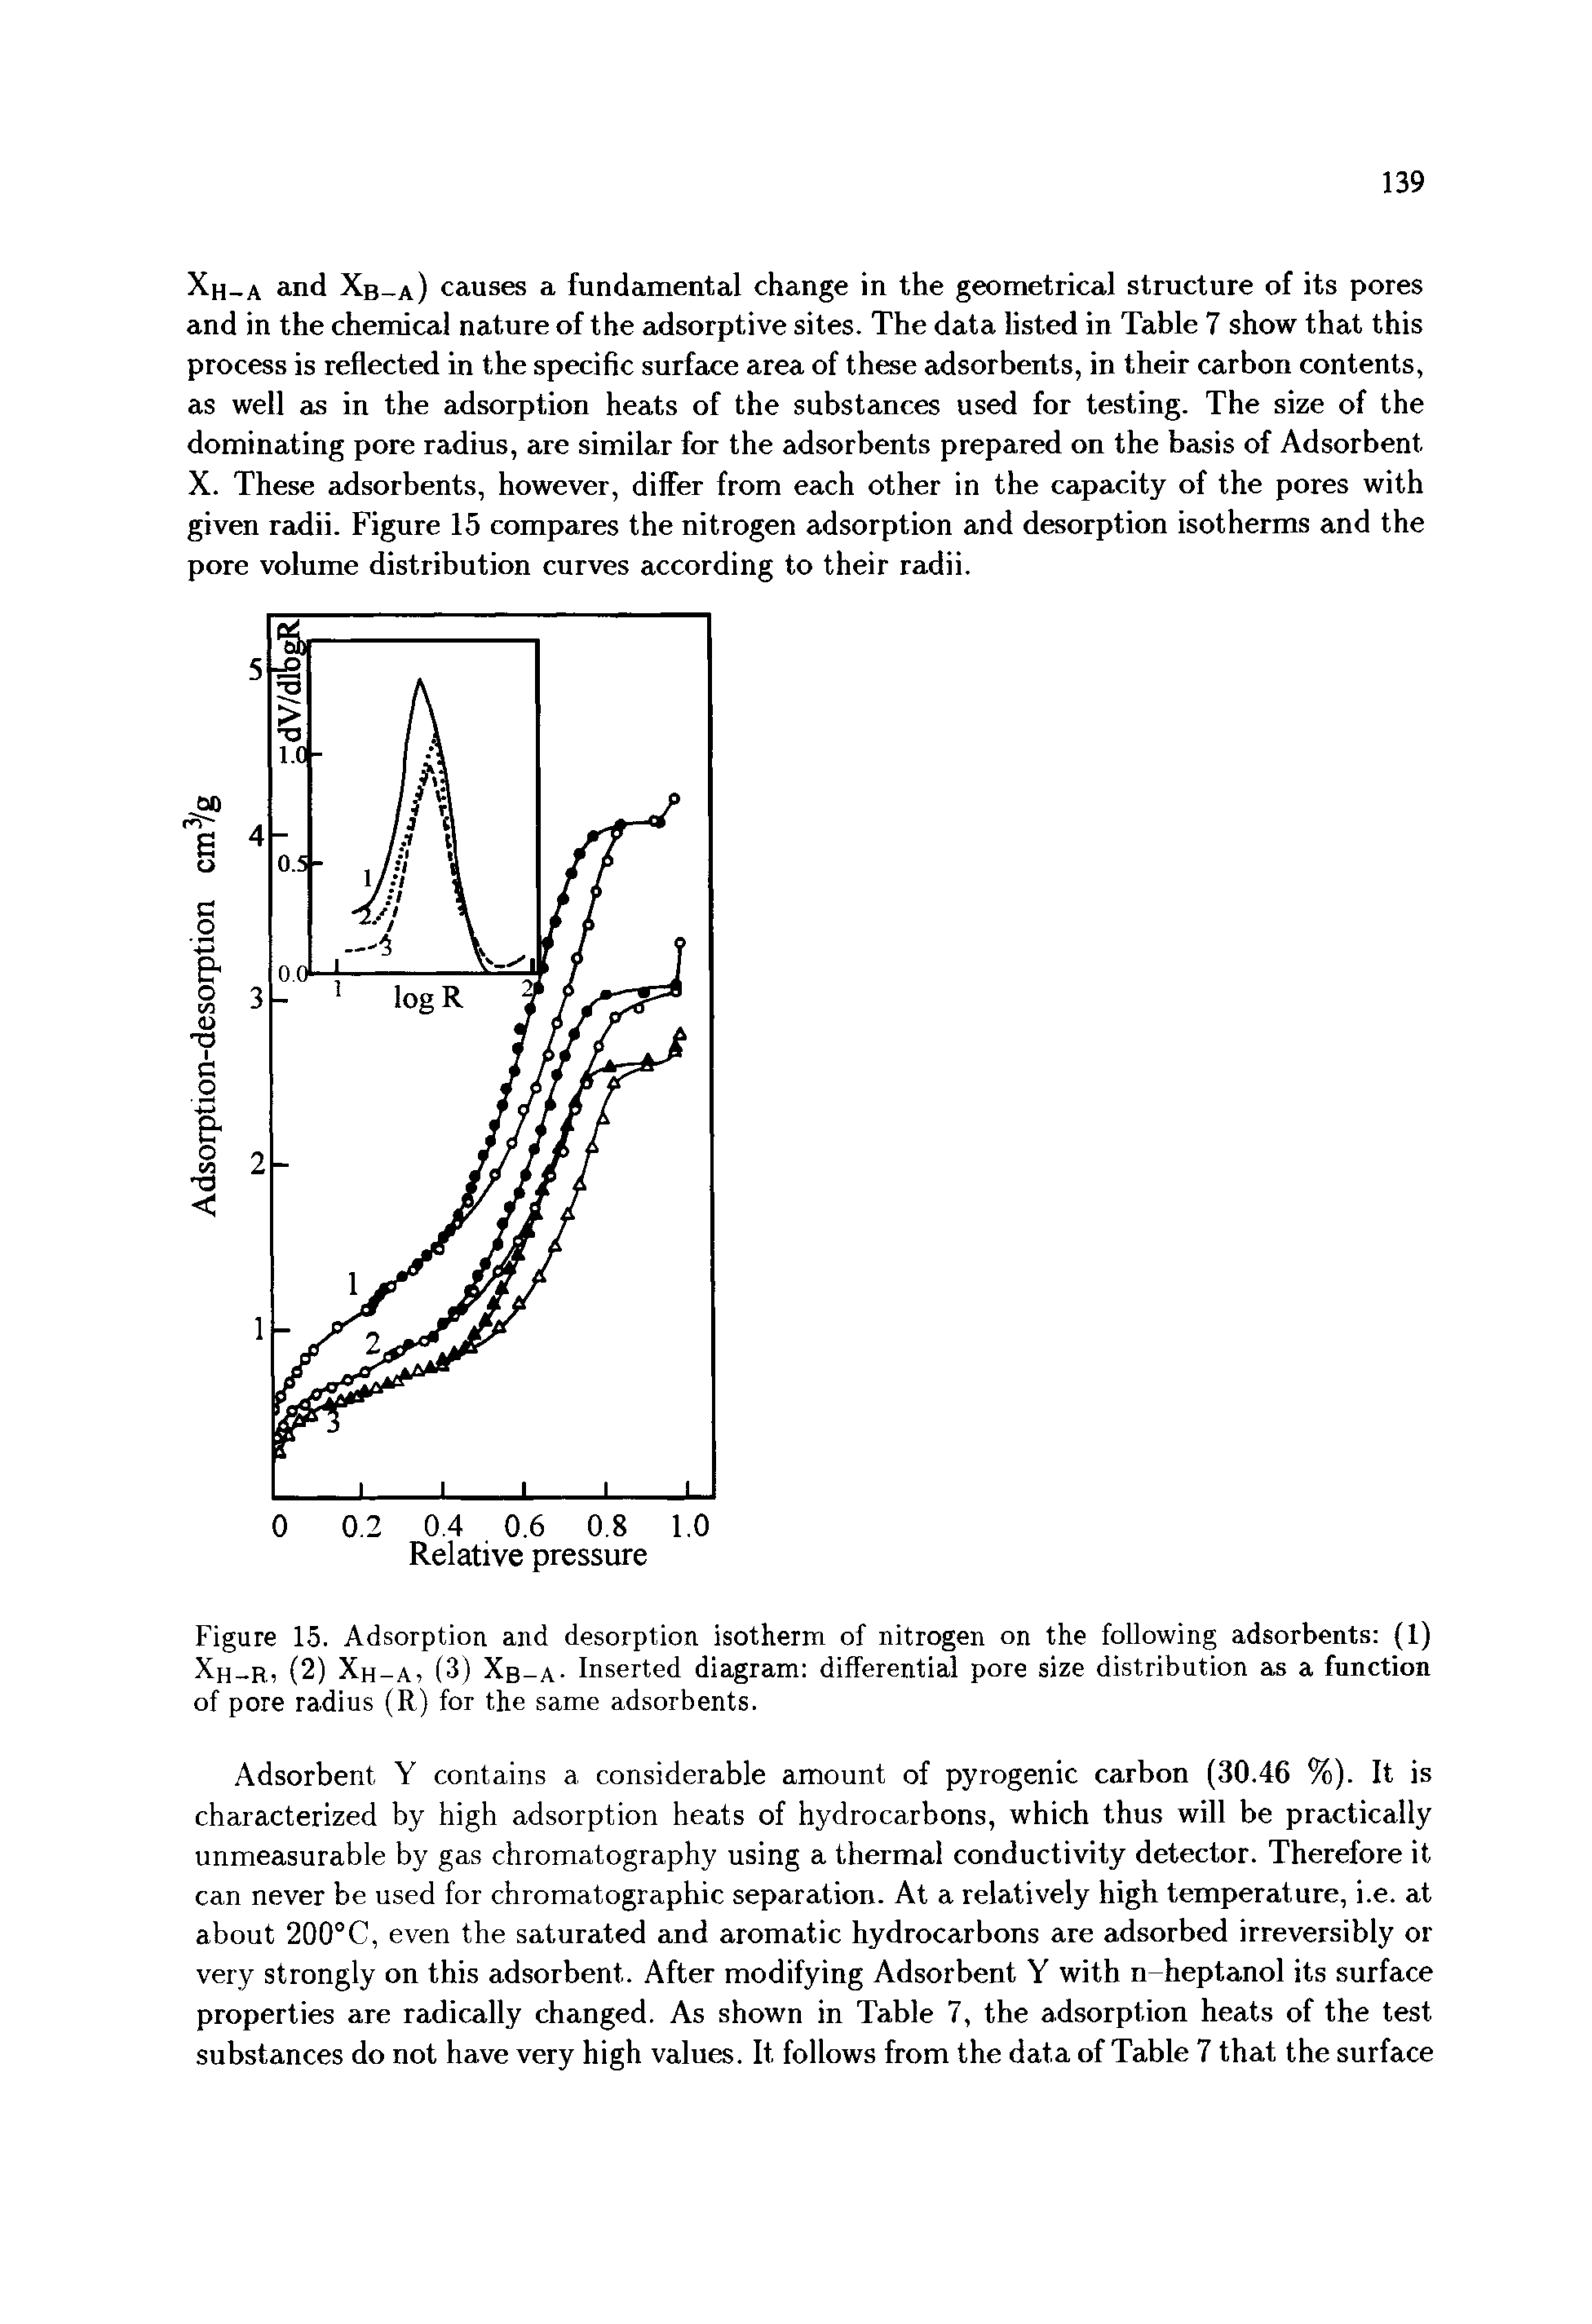 Figure 15. Adsorption and desorption isotherm of nitrogen on the following adsorbents (1) Xh r, (2) Xh-a, (3) Xb-a- Inserted diagram differential pore size distribution as a function of pore radius (R) for the same adsorbents.